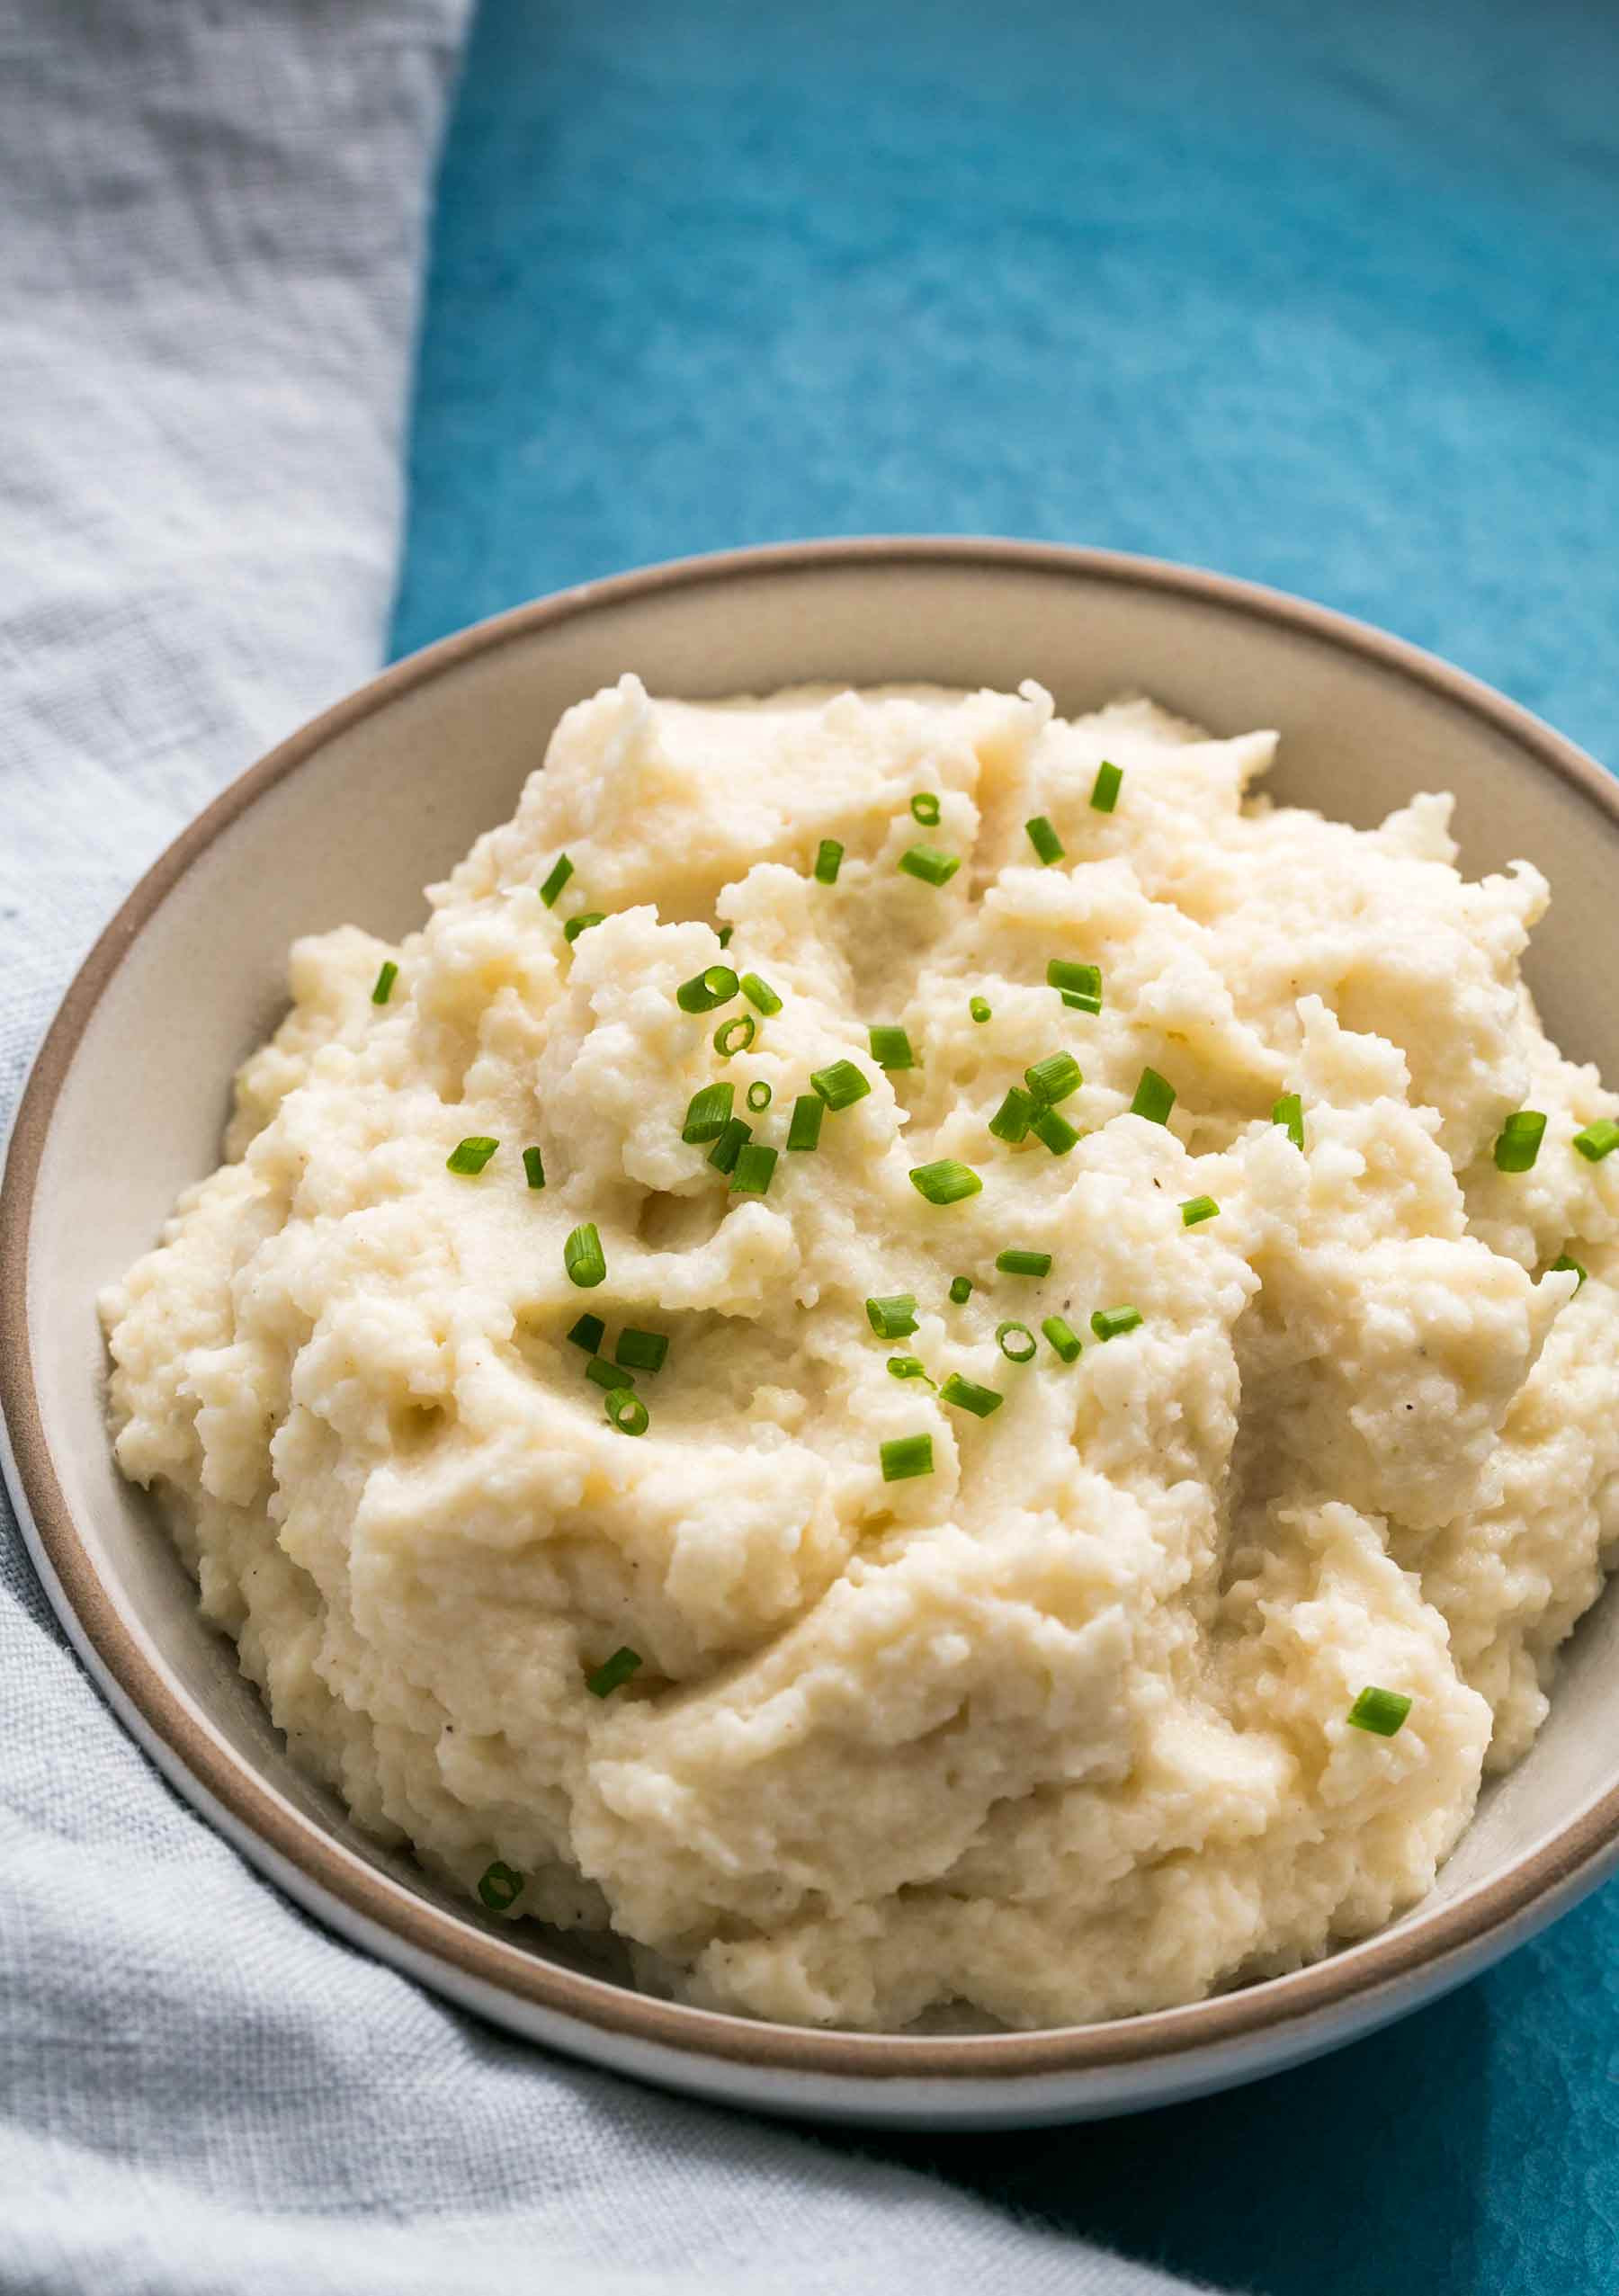 Low Carb Cauliflower Mashed Potatoes
 low carb cauliflower mashed potatoes